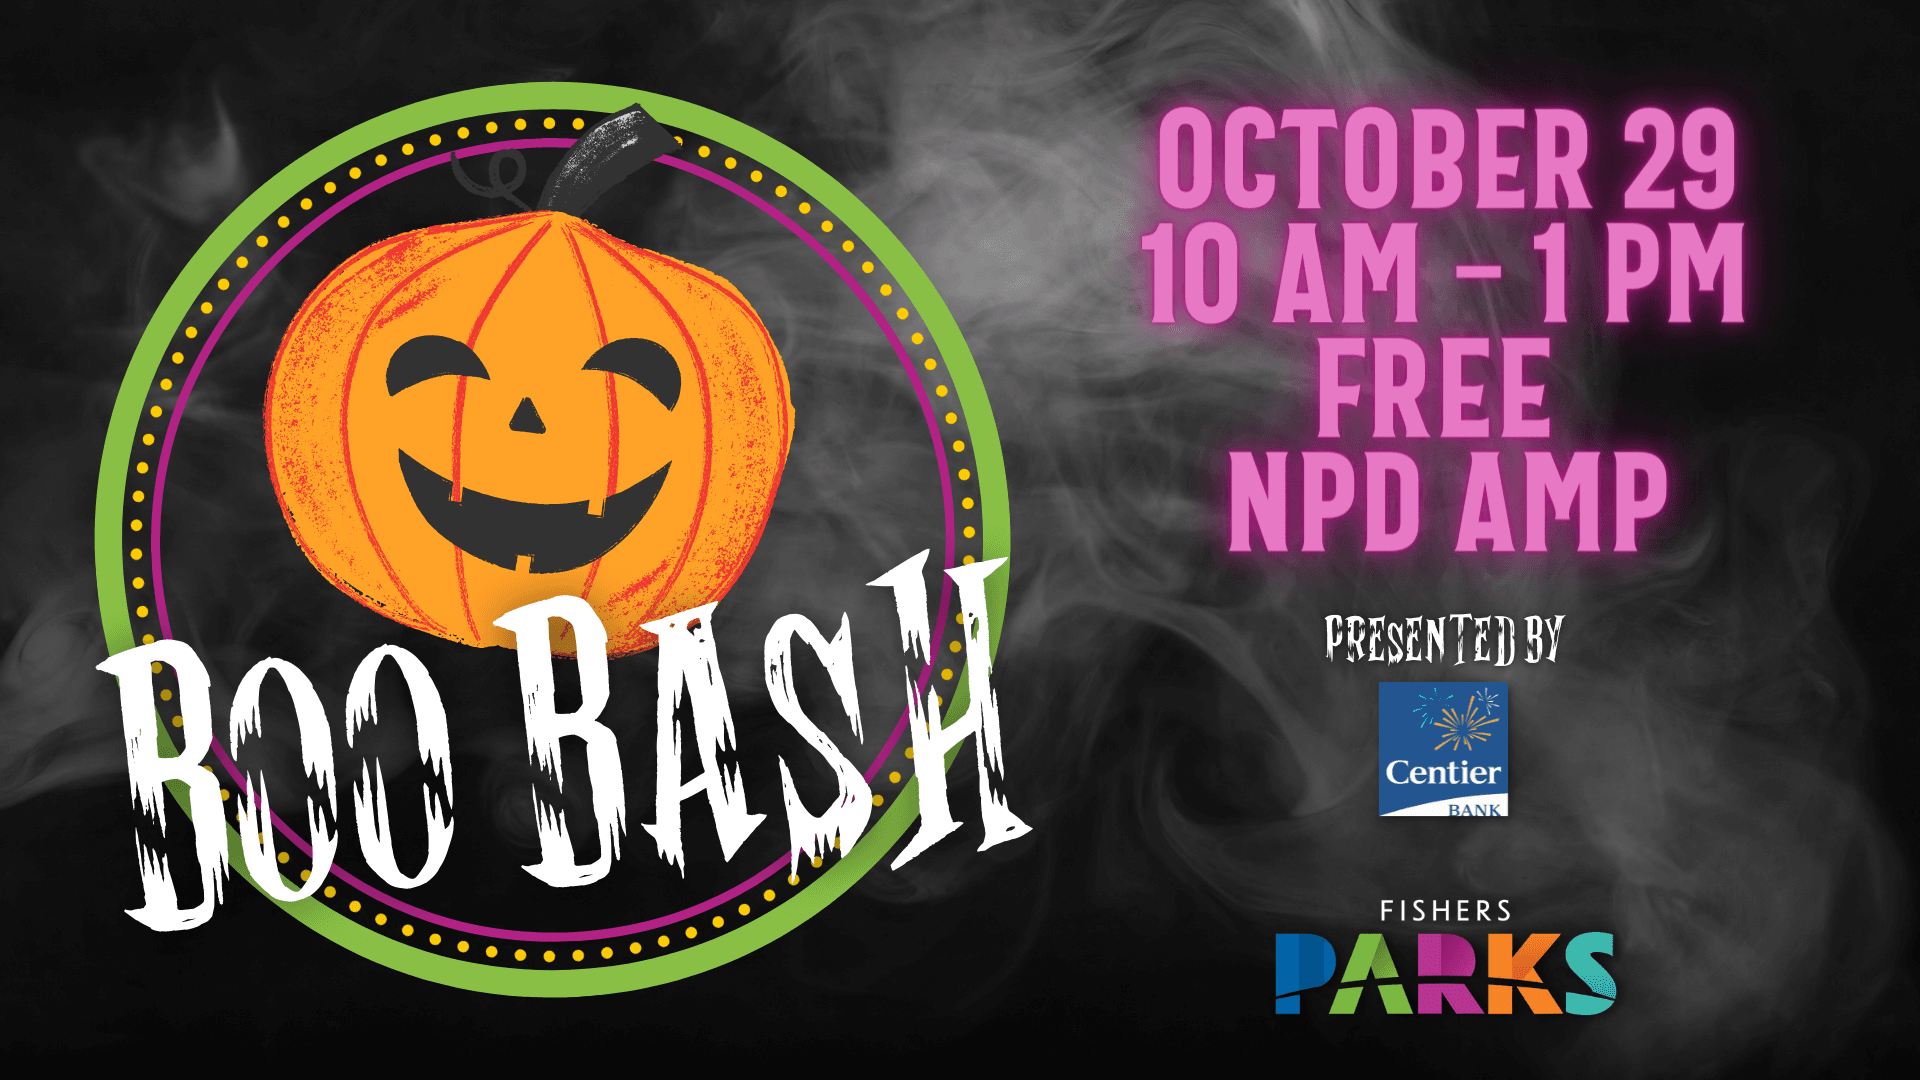 Boo Bash October 29 10am - 1 pm free npd amp